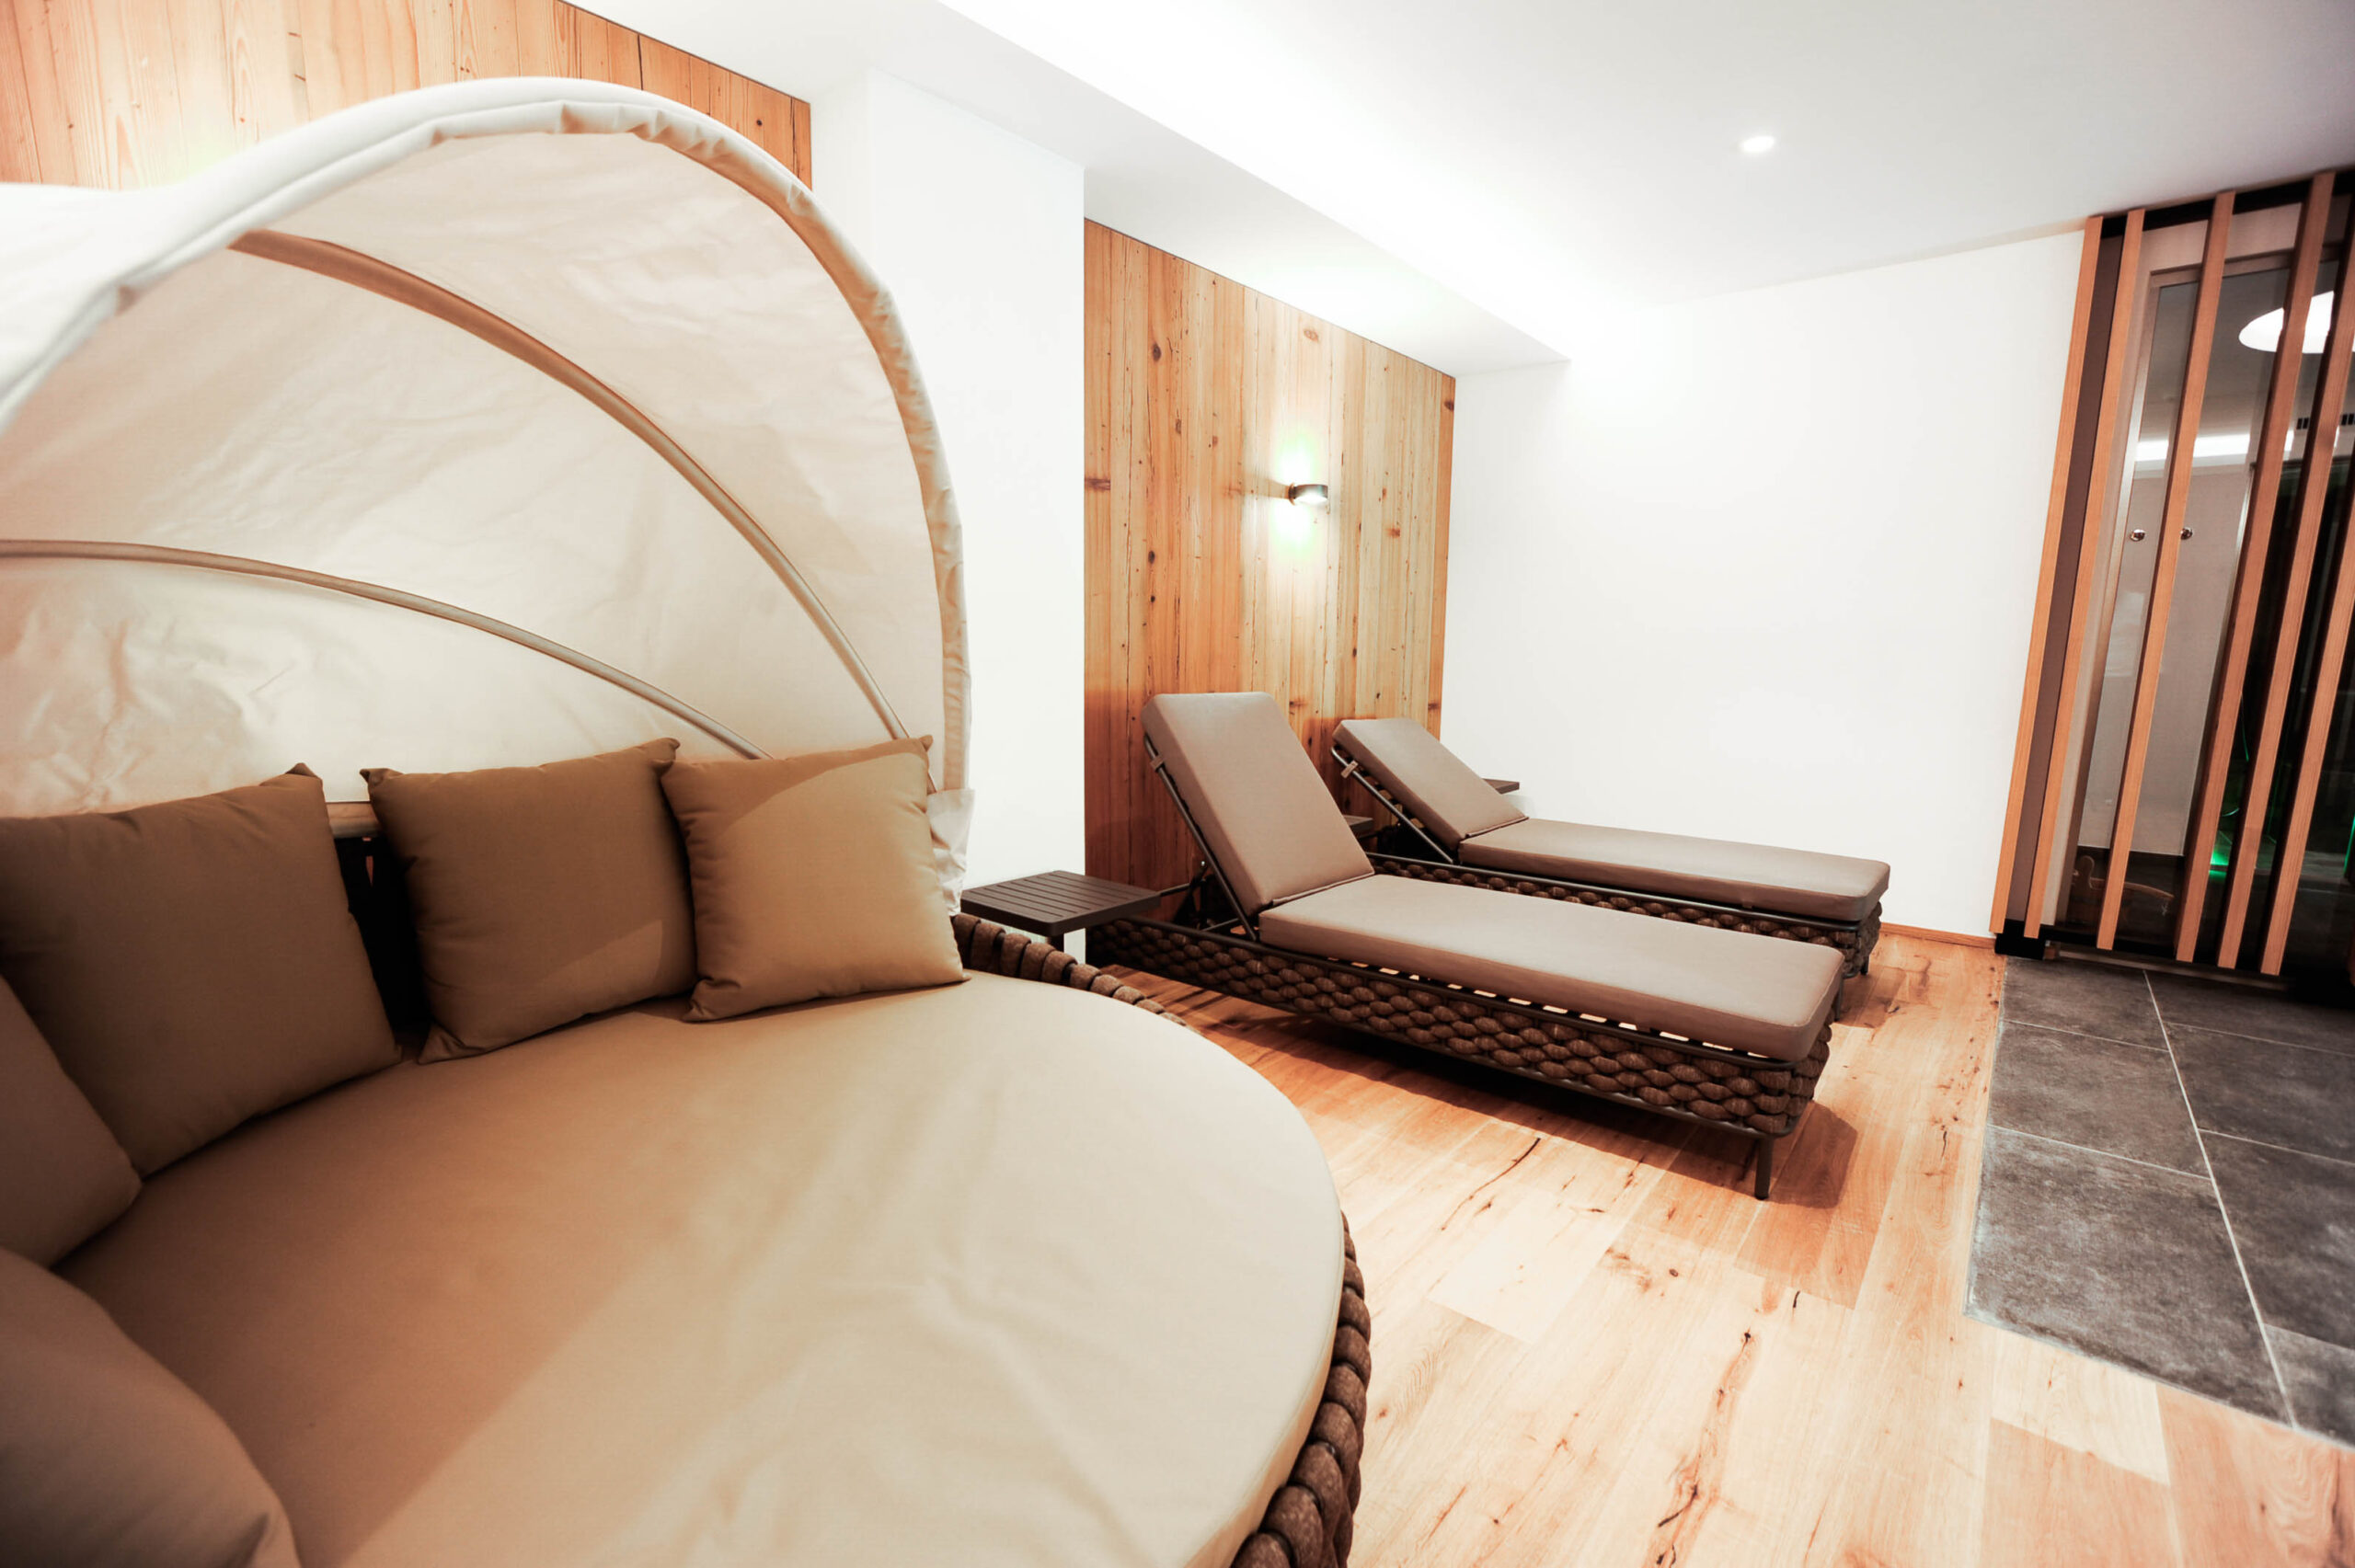 This is what you can expect from us in the Wellness & Mountain Spa